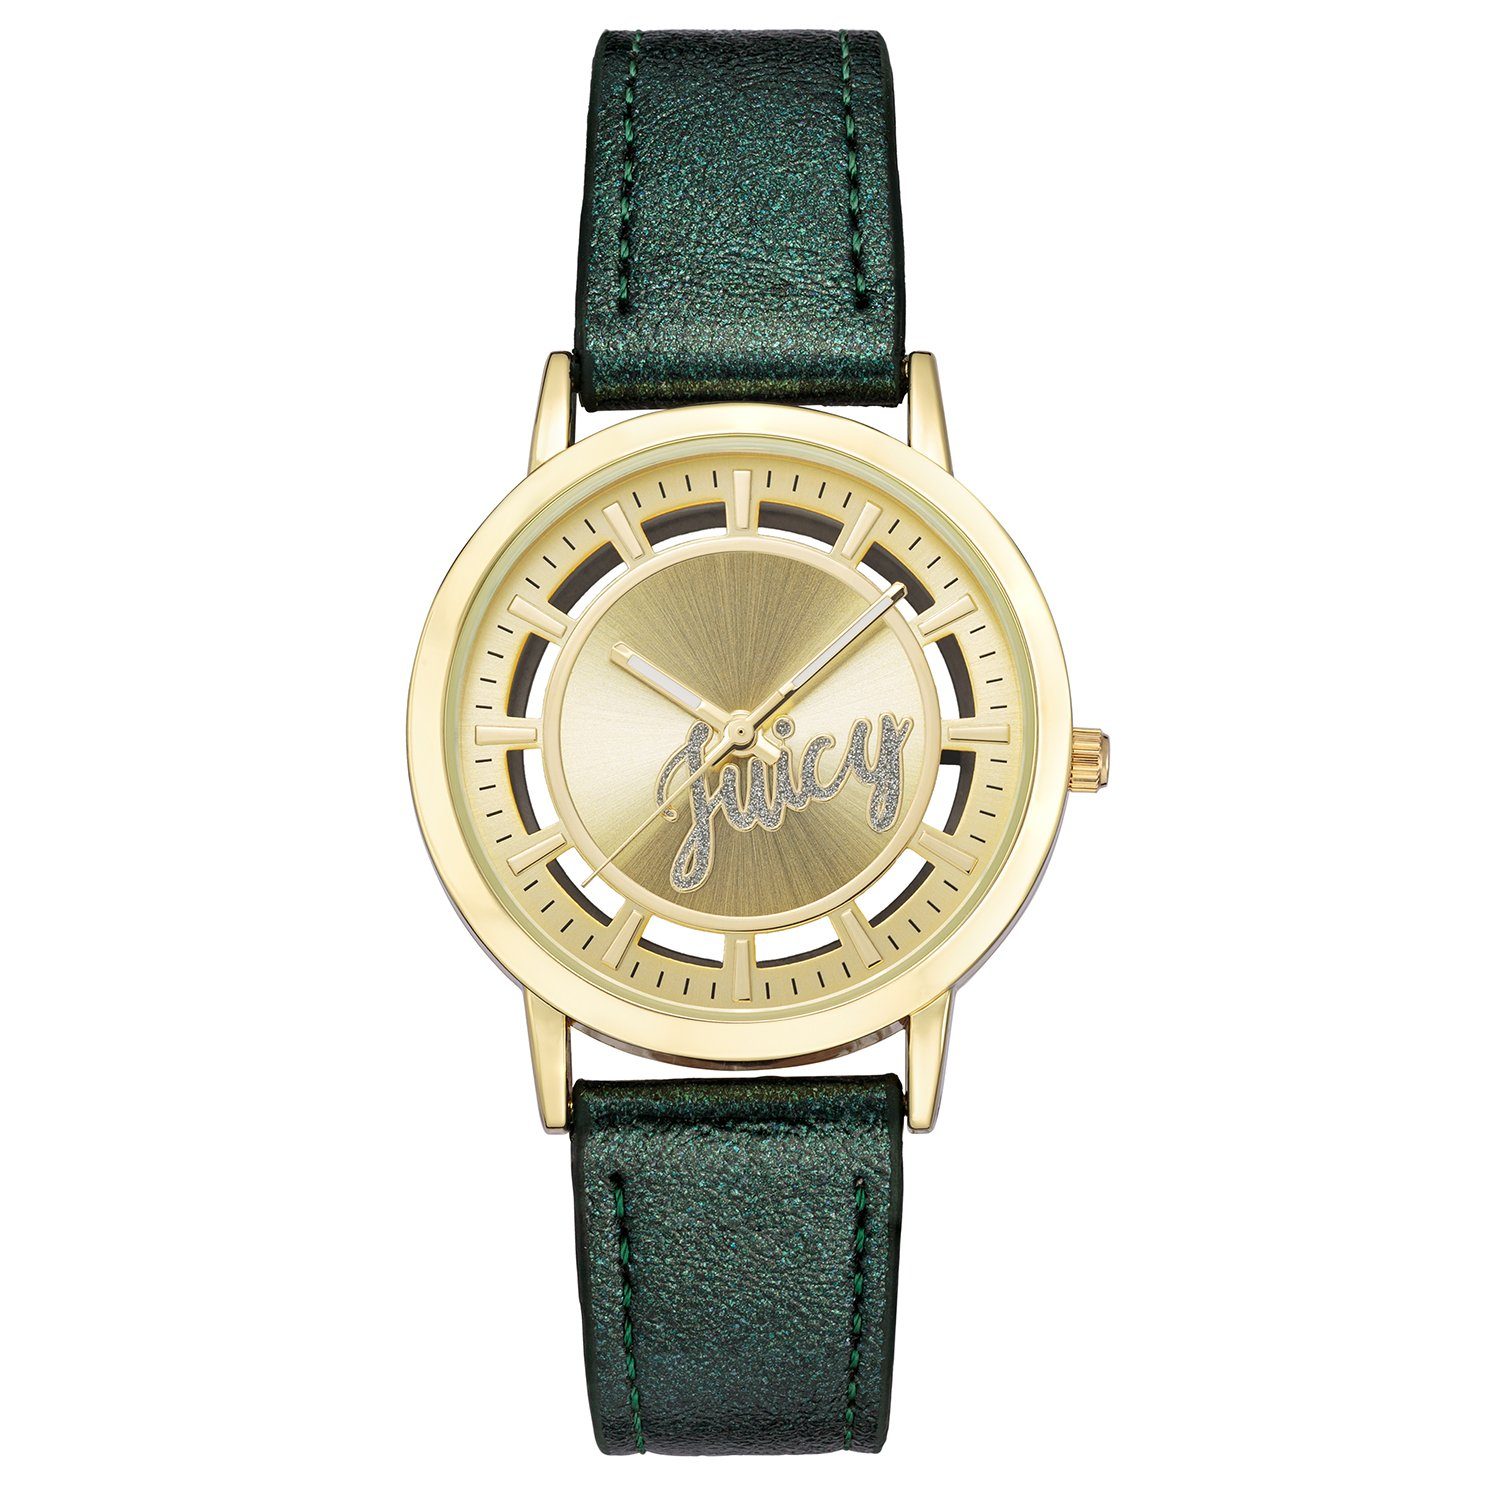 Juicy Couture Digitaluhr JC/1214GPGN